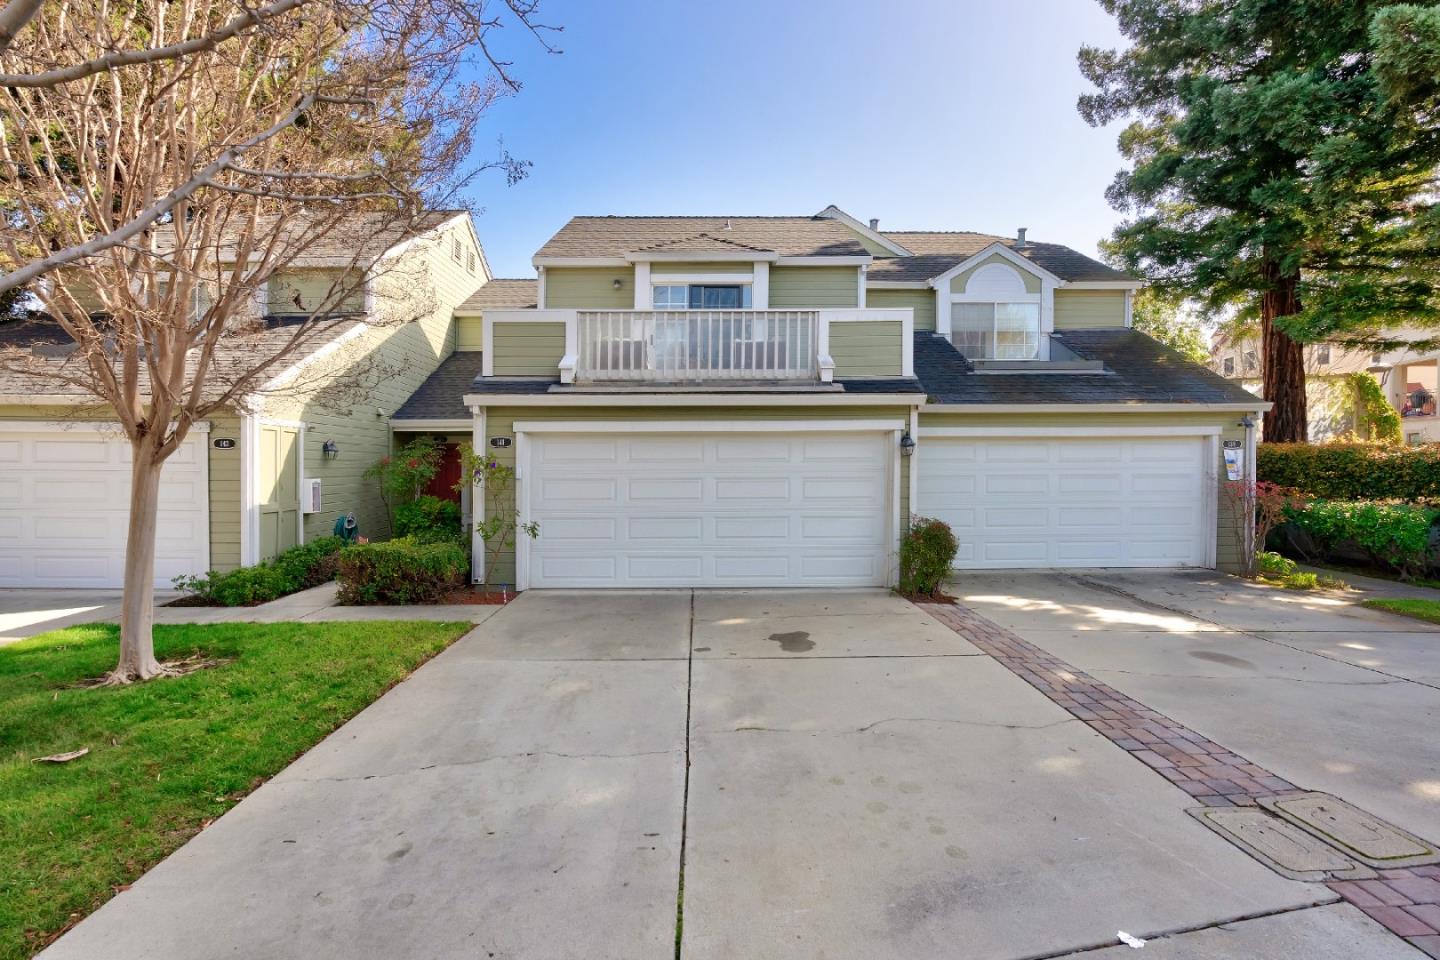 141 Easy St, Mountain View, CA 94043